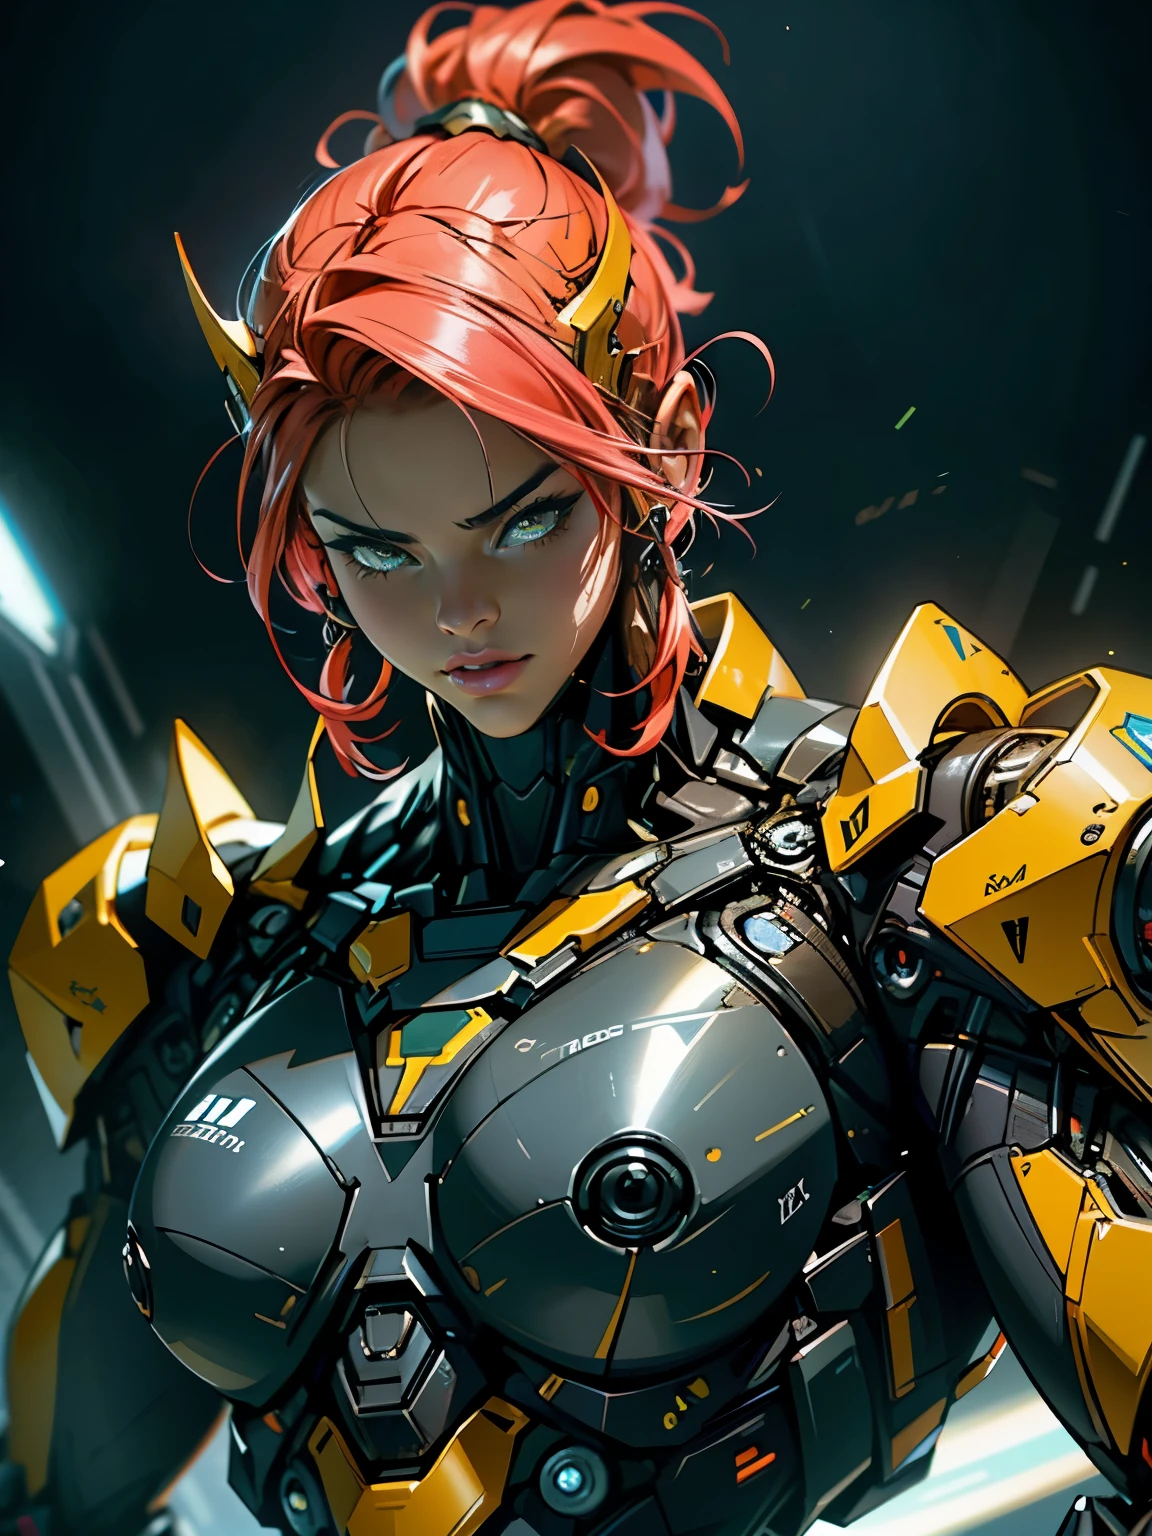 Cinematic, hyper-detailed, and insanely detailed, this artwork captures the essence of a bald hairless muscular female android girl. Beautiful color grading, enhancing the overall cinematic feel. Unreal Engine brings her anatomic cybernetic muscle suit to life, appearing even more mesmerizing. With the use of depth of field (DOF), every detail is focused and accentuated, drawing attention to her eyes and the intricate design of the anatomic cybernetic muscle suit . The image resolution is at its peak, utilizing super-resolution technology to ensure every pixel is perfect. Cinematic lighting enhances her aura, while anti-aliasing techniques like FXAA and TXAA keep the edges smooth and clean. Adding realism to the anatomic cybernetic muscle suit, RTX technology enables ray tracing. Additionally, SSAO (Screen Space Ambient Occlusion) gives depth and realism to the scene, the girl's anatomic cybernetic muscle suit become even more convincing. In the post-processing and post-production stages, tone mapping enhances the colors, creating a captivating visual experience. The integration of CGI (Computer-Generated Imagery) and VFX (Visual Effect brings out the anatomic cybernetic muscle suit's intricate features in a seamless manner. SFX (Sound Effects) complement the visual artistry, immersing the viewer further into this fantastic world. The level of detail is awe-inspiring, with intricate elements meticulously crafted, the artwork hyper maximalist and hyper-realistic. Volumetric effects add depth and dimension, and the photorealism is unparalleled. The image is rendered in 8K resolution, ensuring super-detailed visuals. The volumetric lightning adds a touch of magic, highlighting her beauty and the aura of her anatomic cybernetic muscle suit in an otherworldly way. High Dynamic Range (HDR) technology makes the colors pop, adding richness to the overall composition. Ultimately, this artwork presents an unreal portrayal of a super muscled cybernetic female android